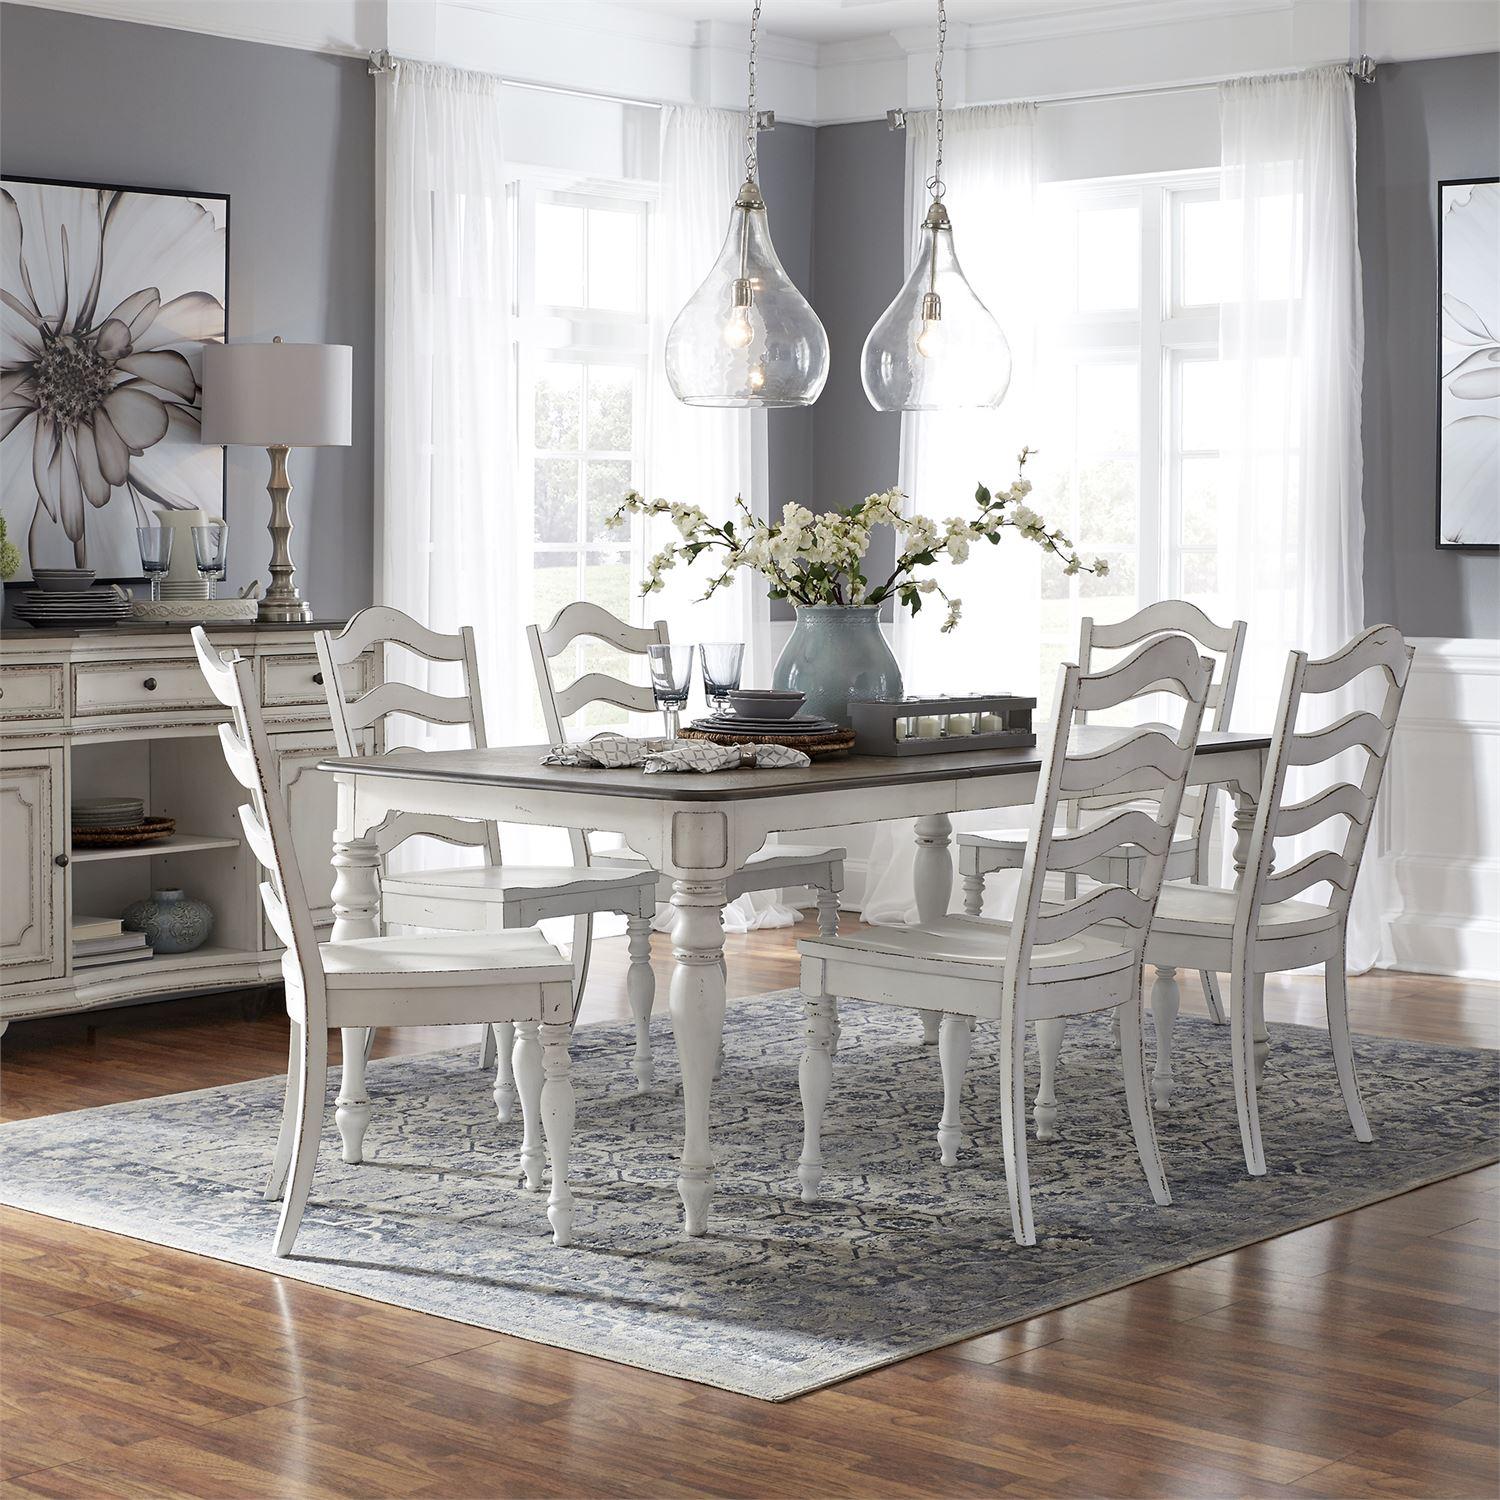 European Traditional Dining Table Set Magnolia Manor  (244-CD) Dining Room Set 244-CD-7LGS in White 